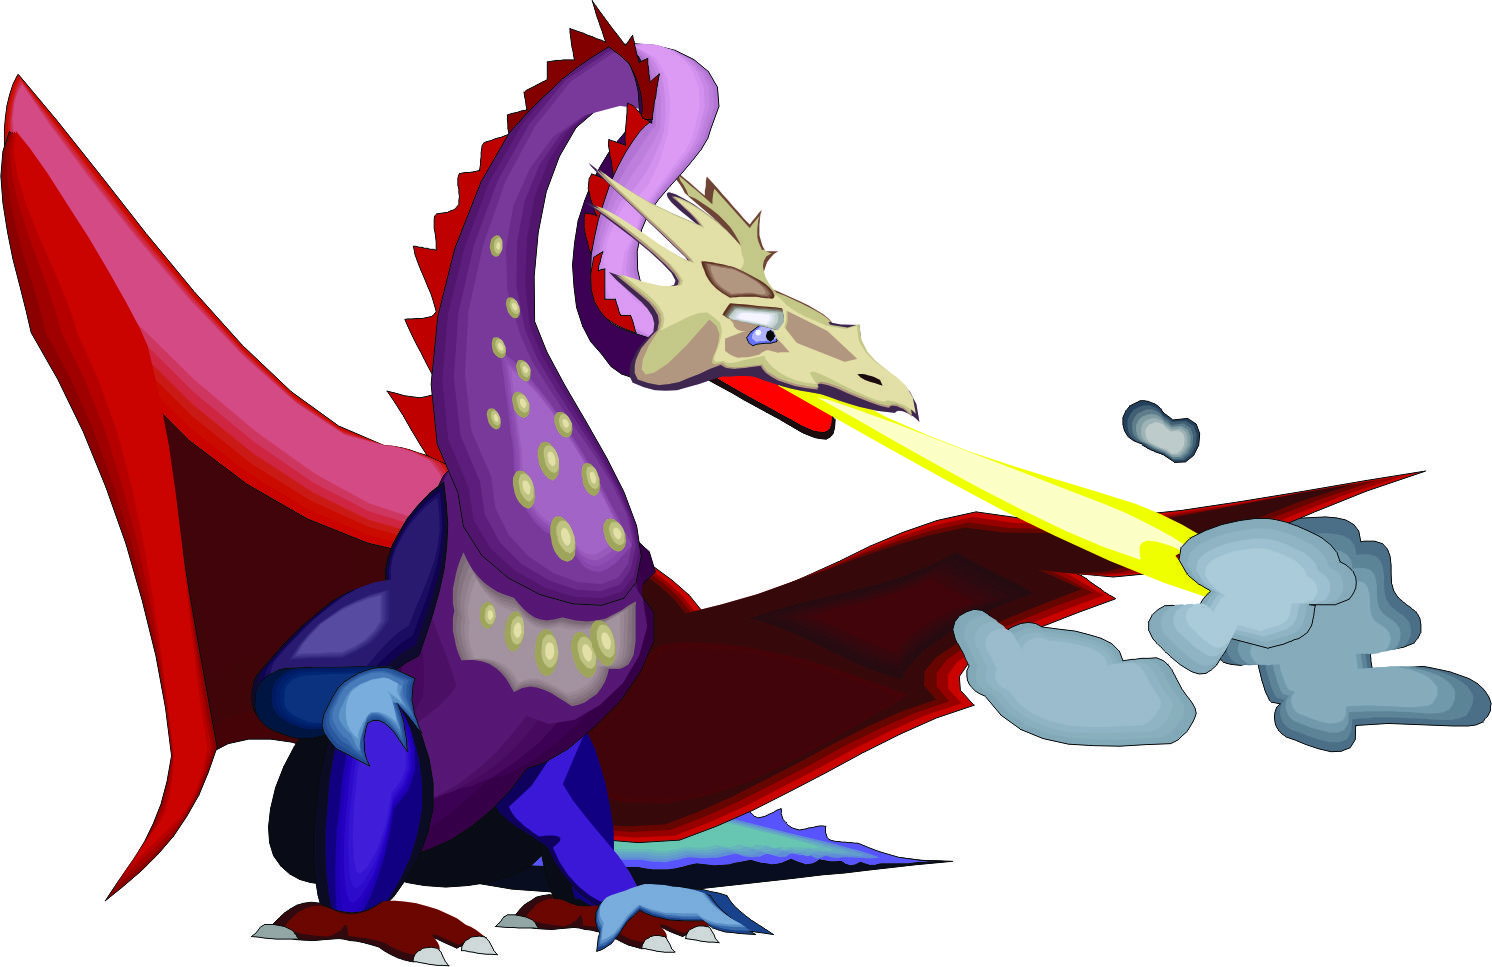 Picture Of Cartoon Dragon - ClipArt Best